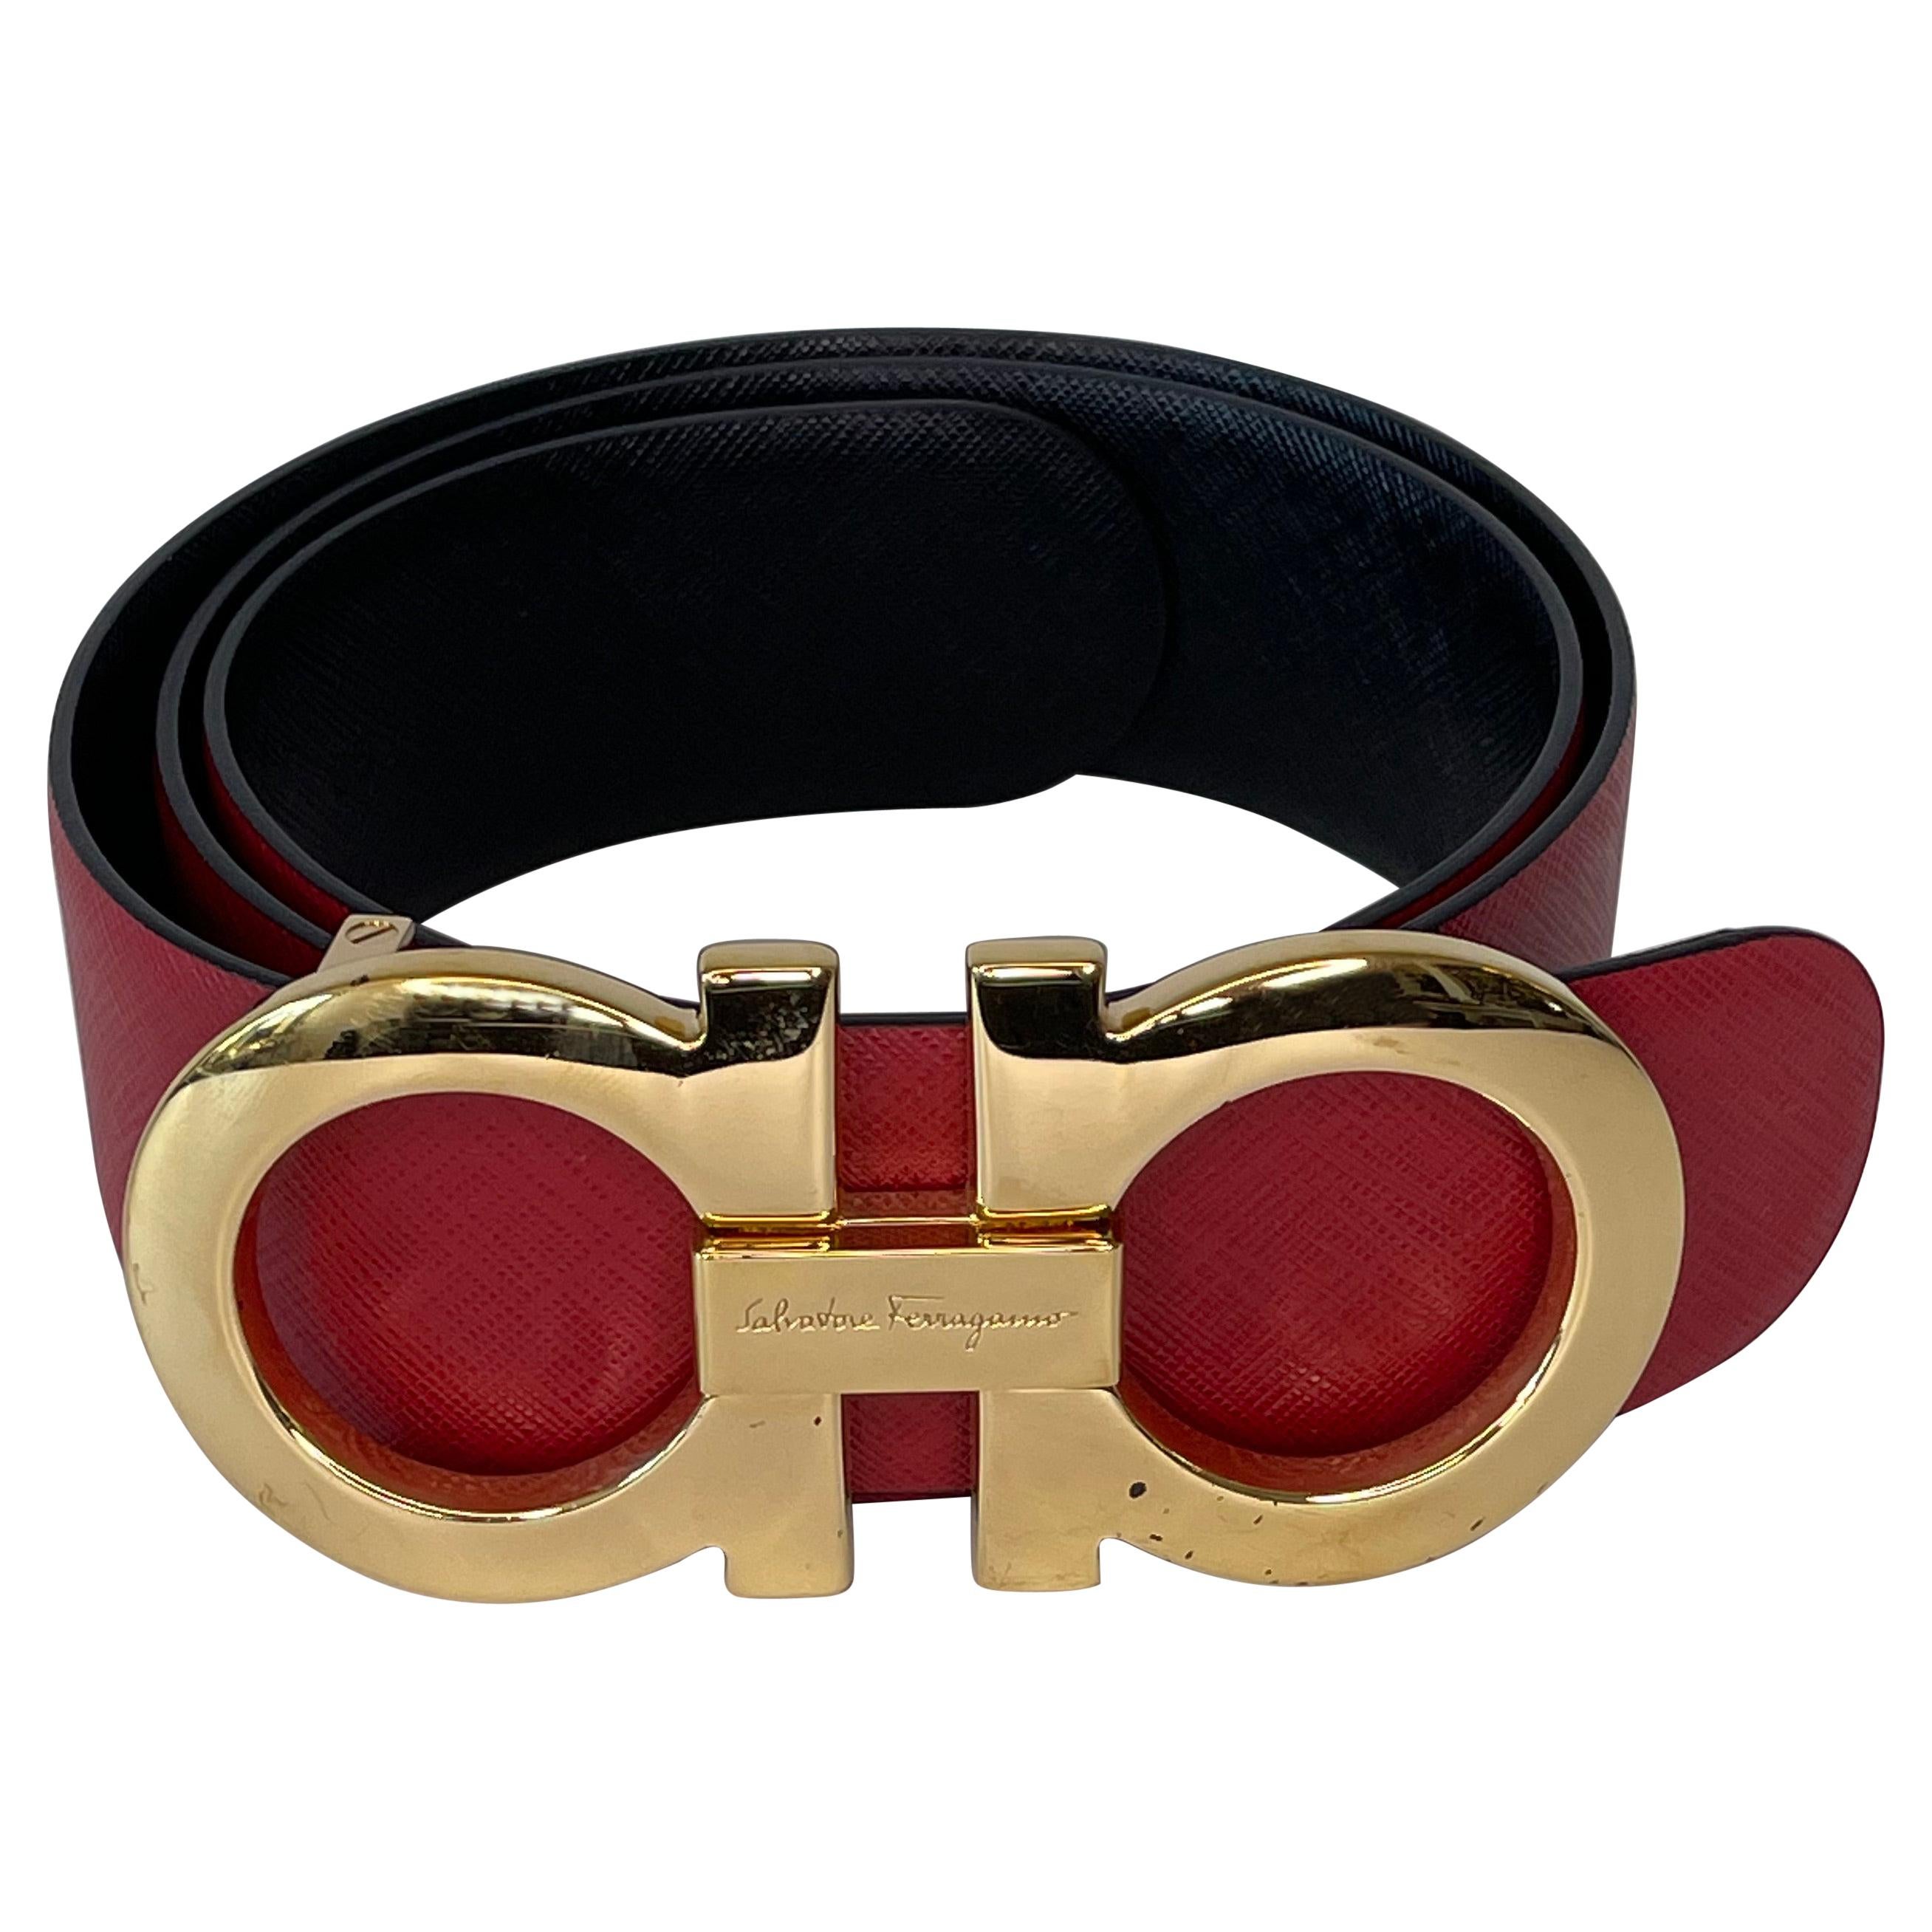 Capo Pelle Men's Red Belt with Gold Buckle